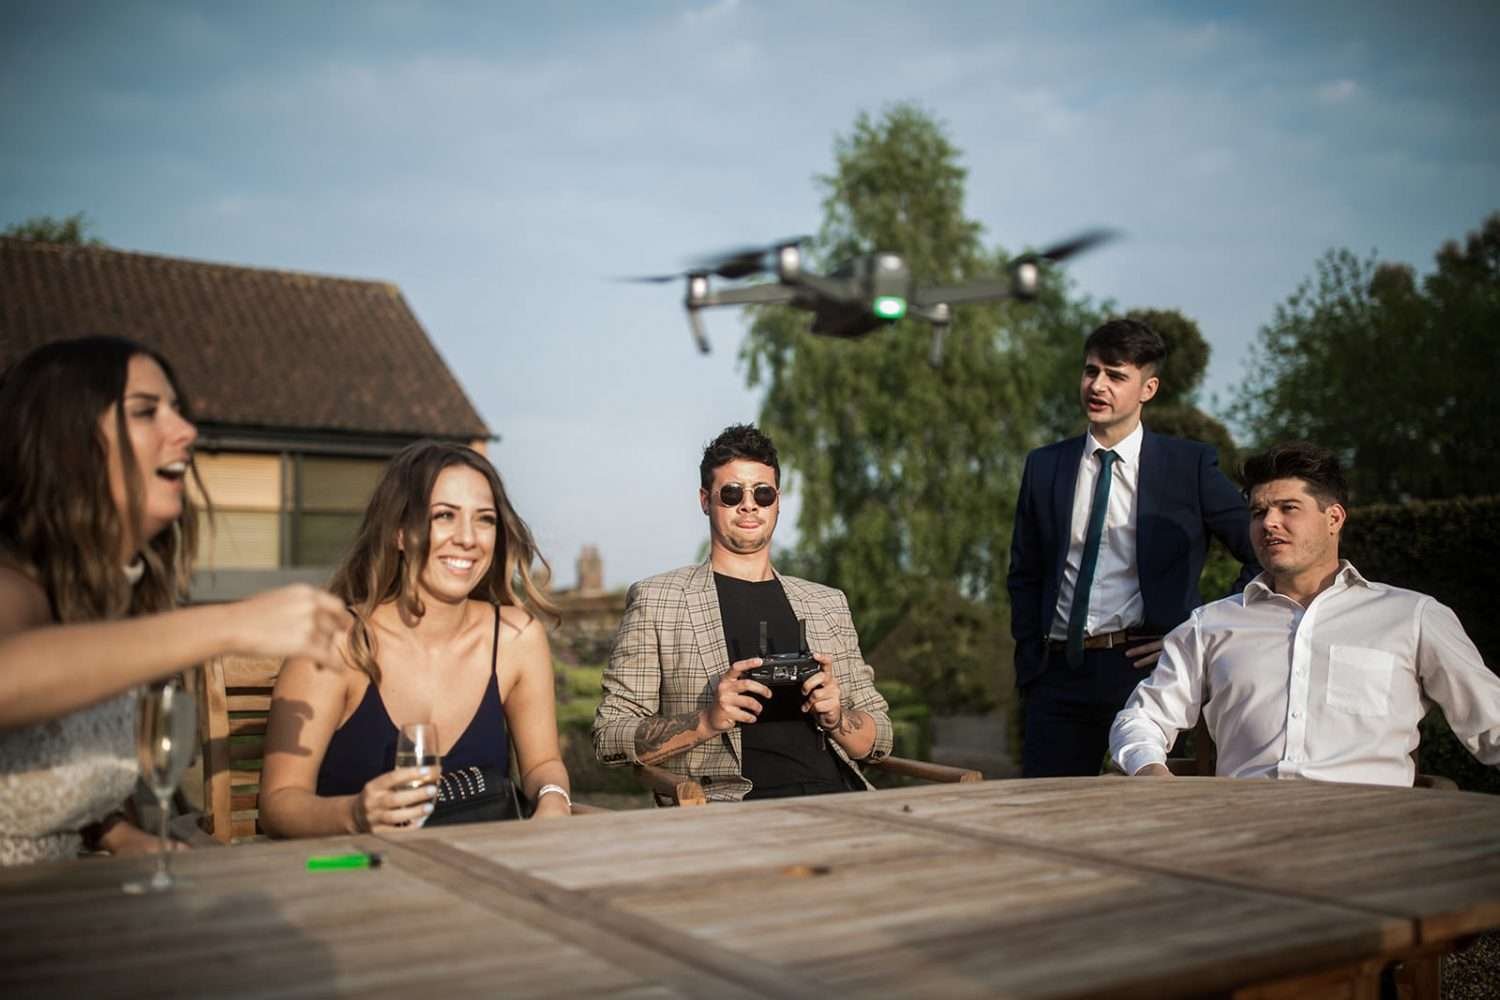 a guest impresses his peers at a wedding with his drone flying skills